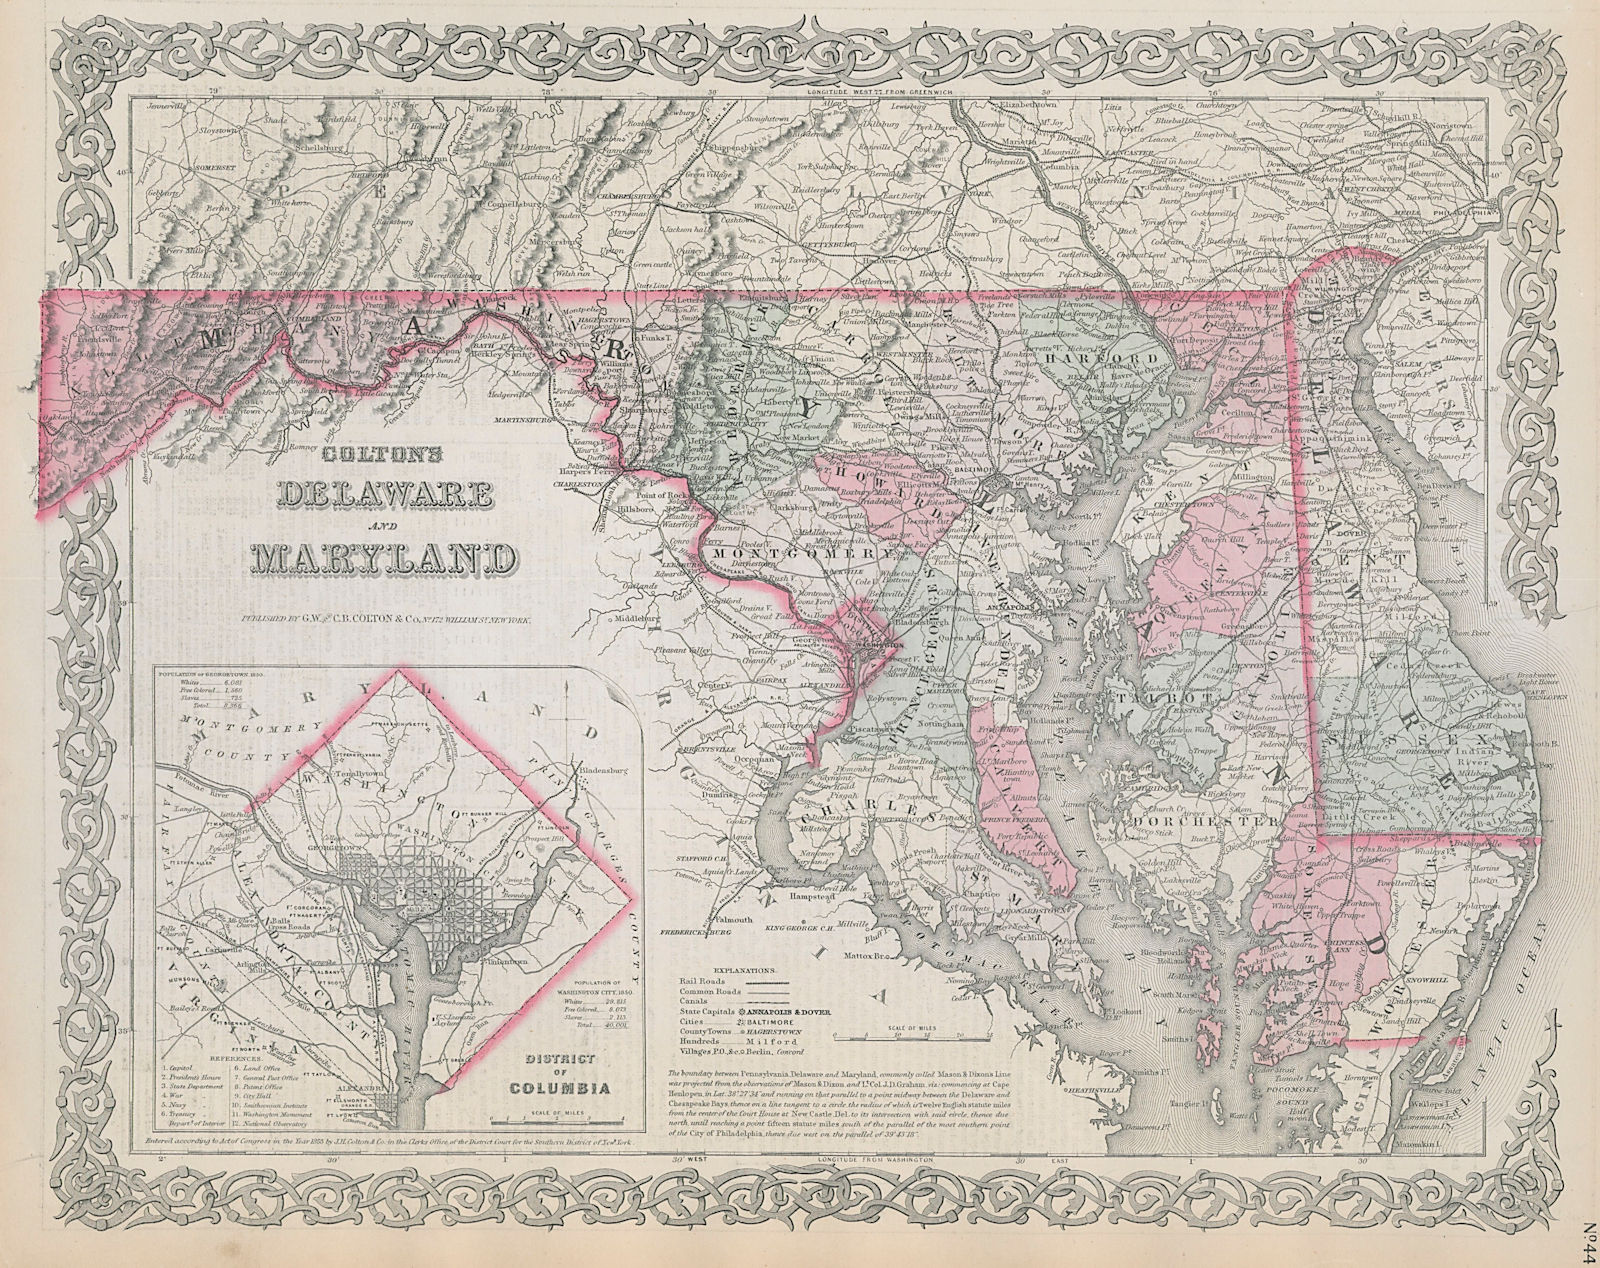 Associate Product Colton's Delaware and Maryland. District of Columbia. US state map 1869